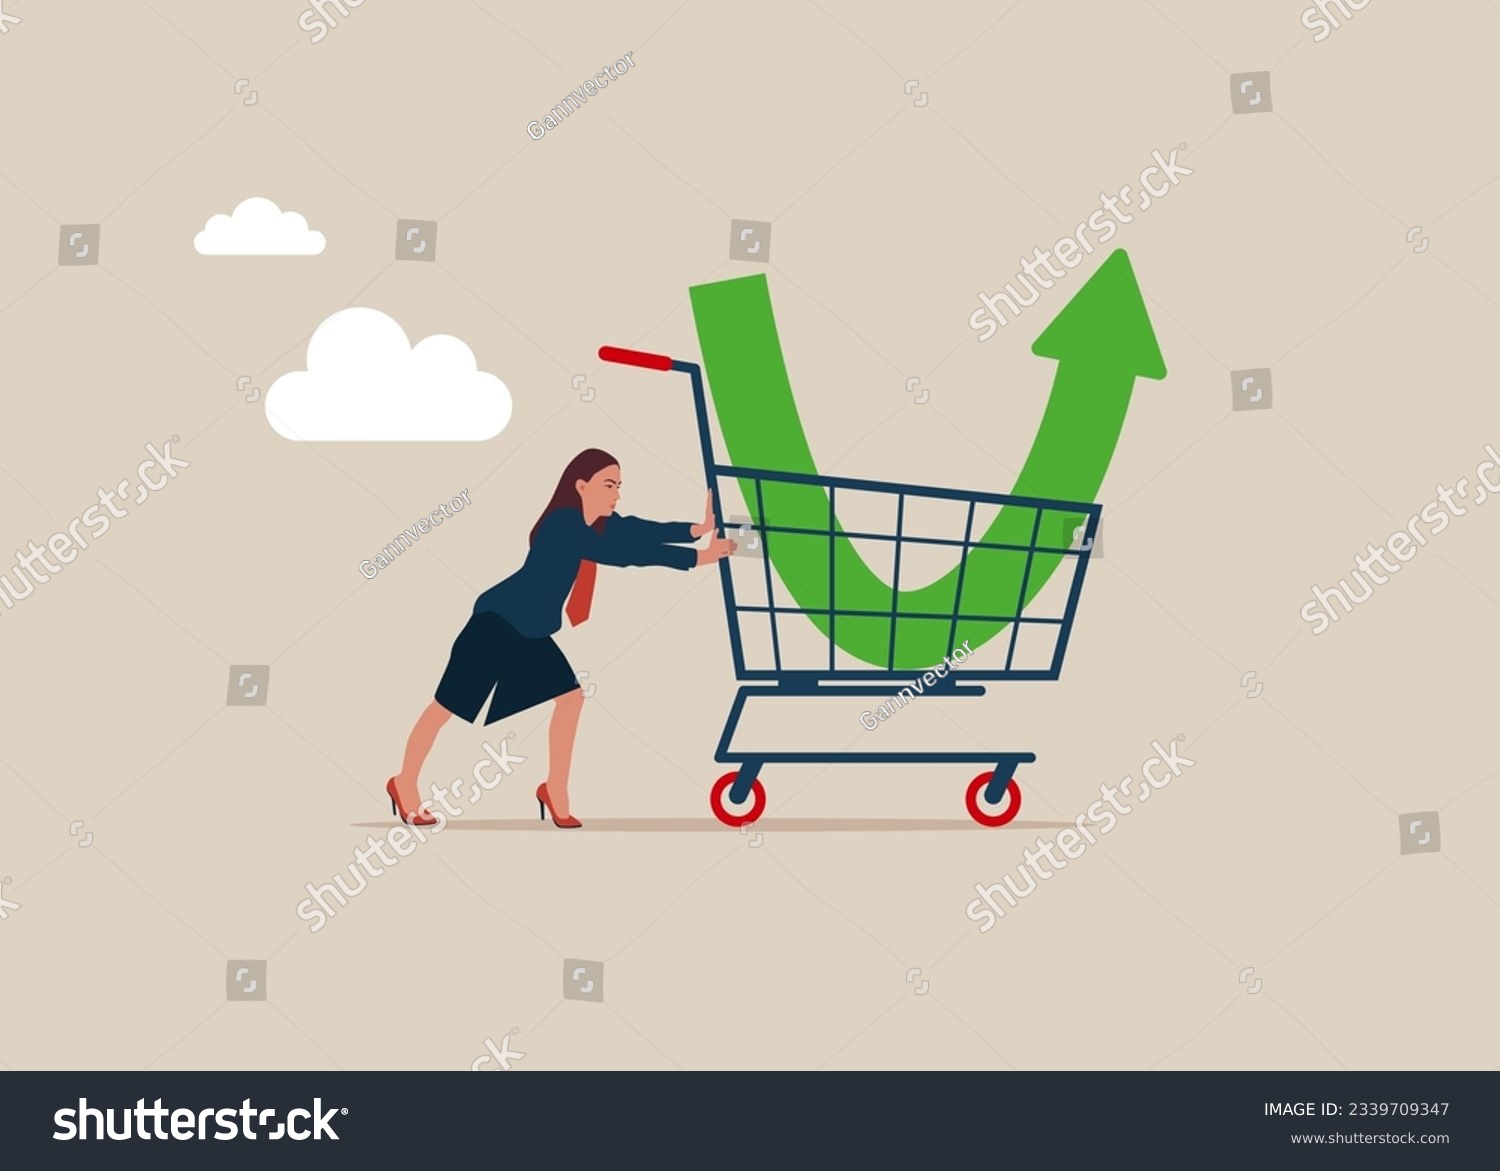 SVG of Woman investor buy stock with down arrow graph in shopping cart. Purchase stock when price drop. Make profit from market collapse. Vector illustration. svg